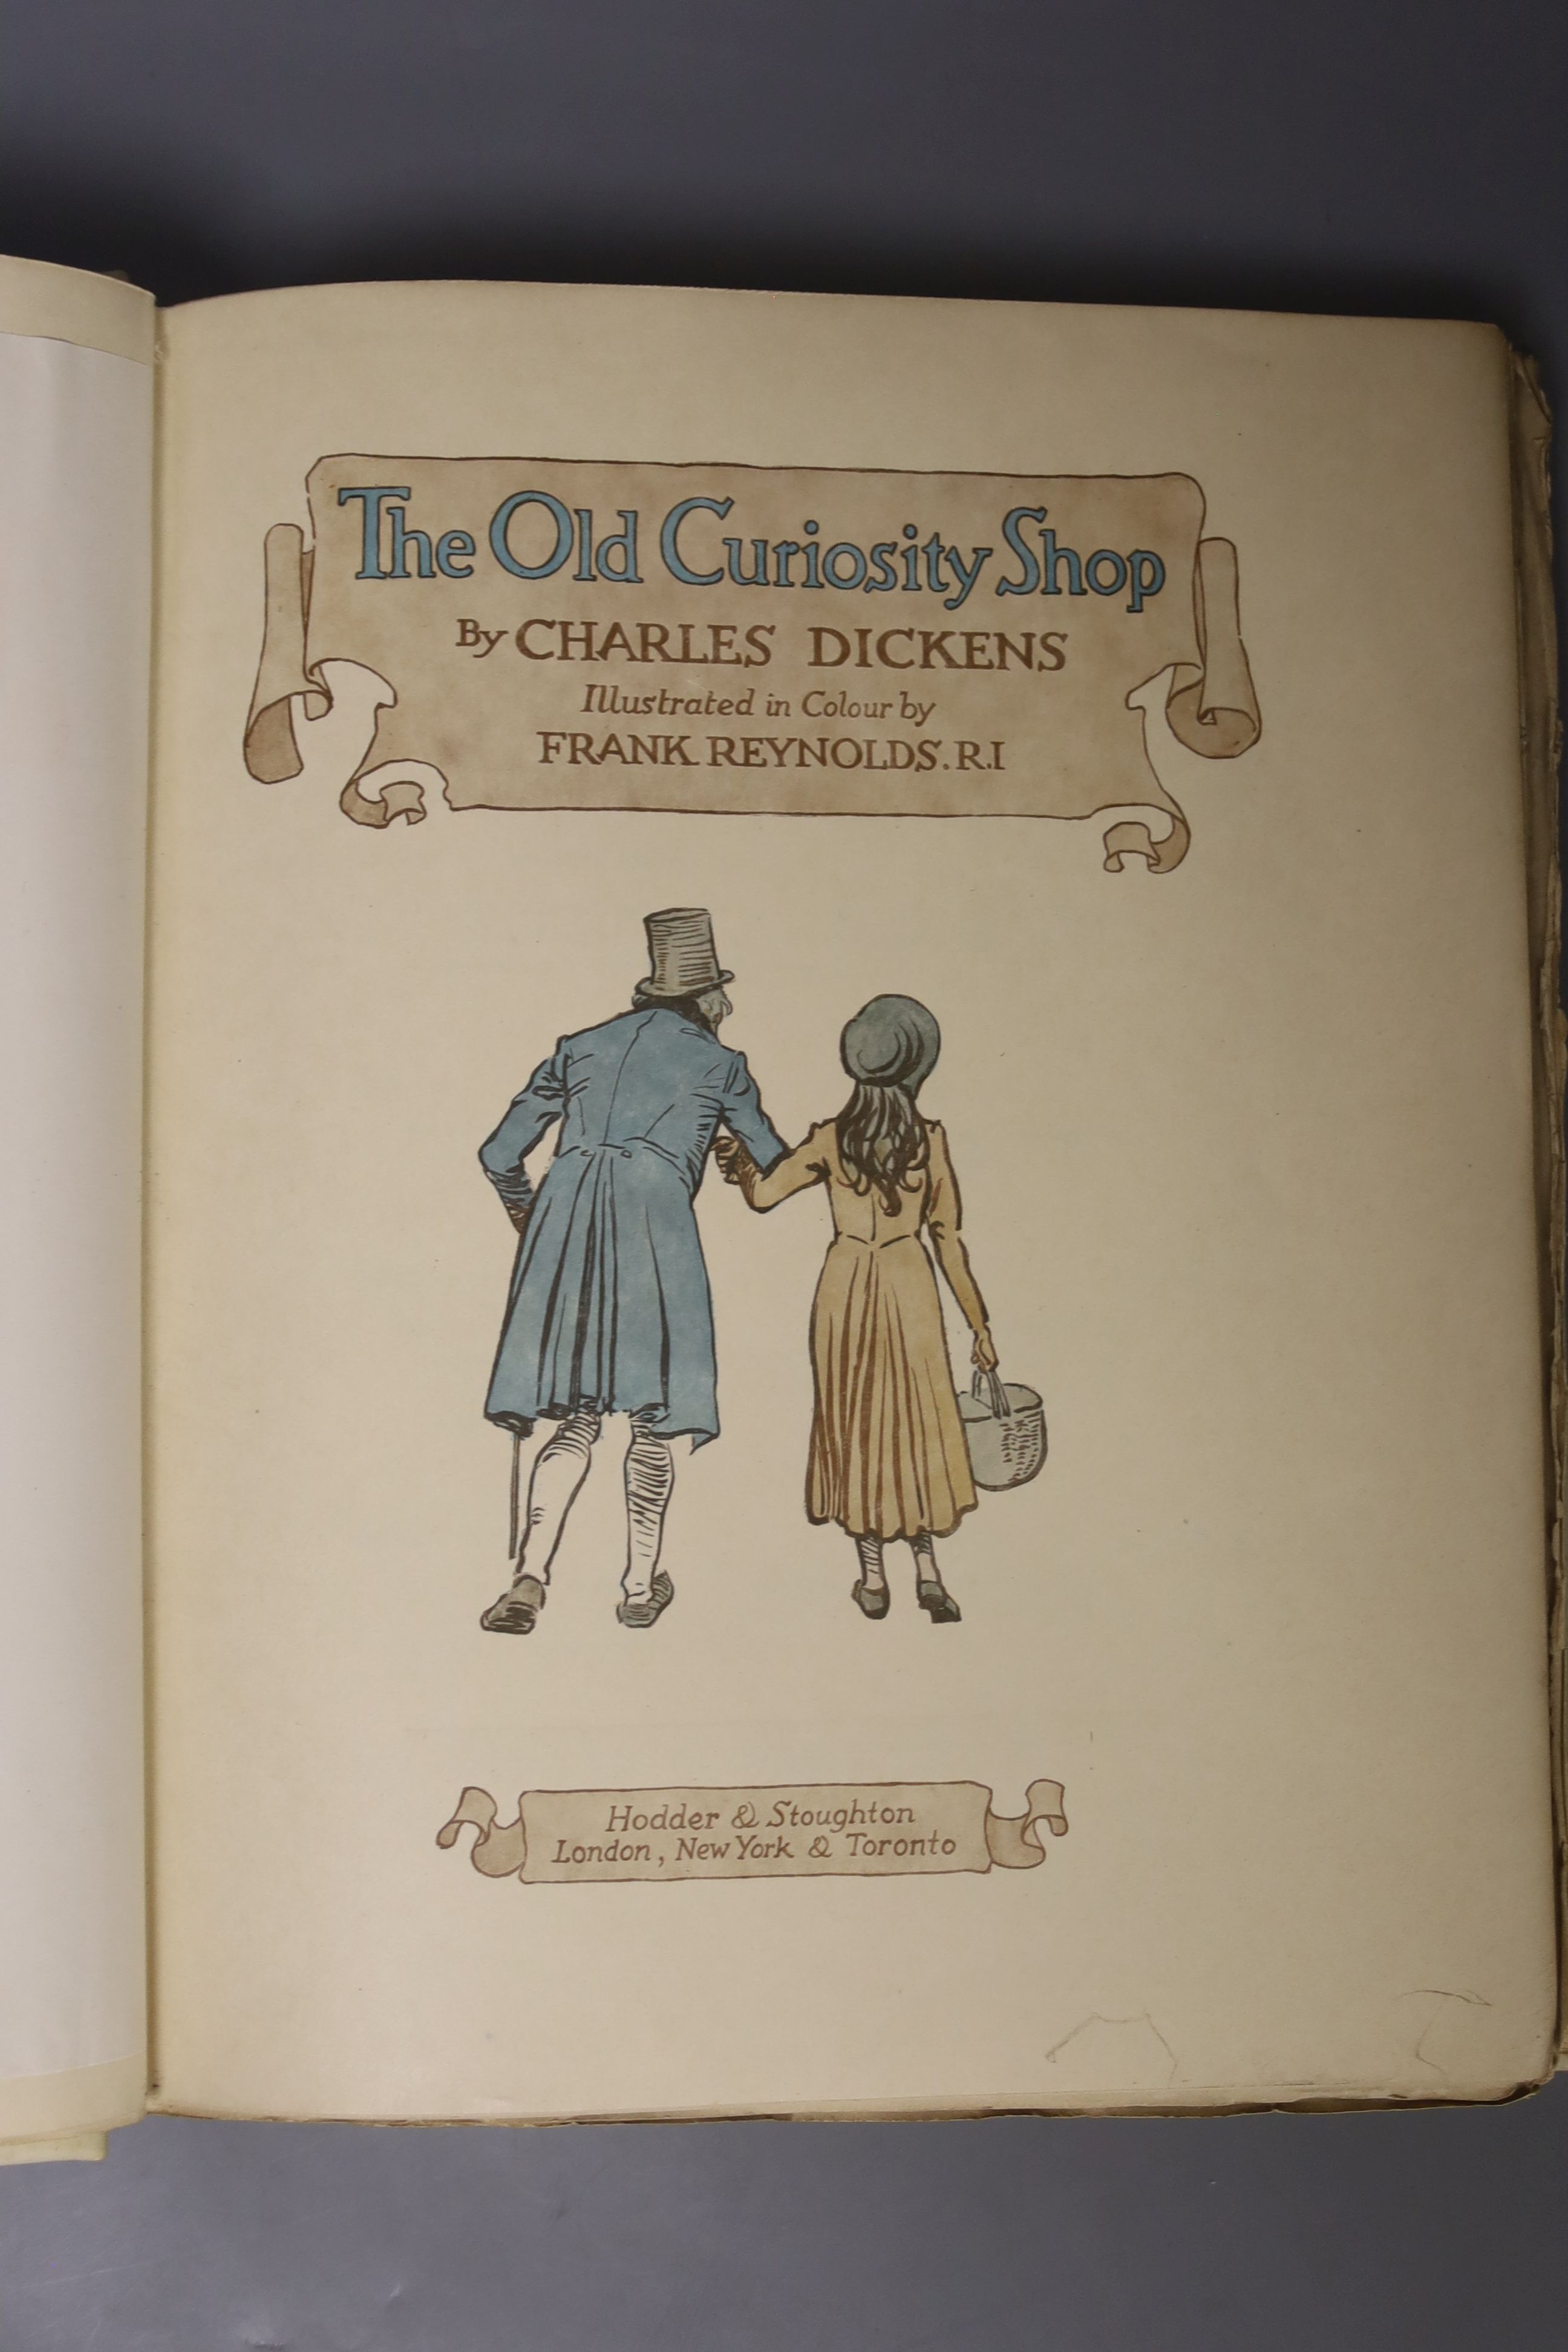 Dickens, Charles - The Old Curiosity Shop, signed and illustrated by Frank Reynolds, quarto, vellum gilt, one of 350, with frontispiece